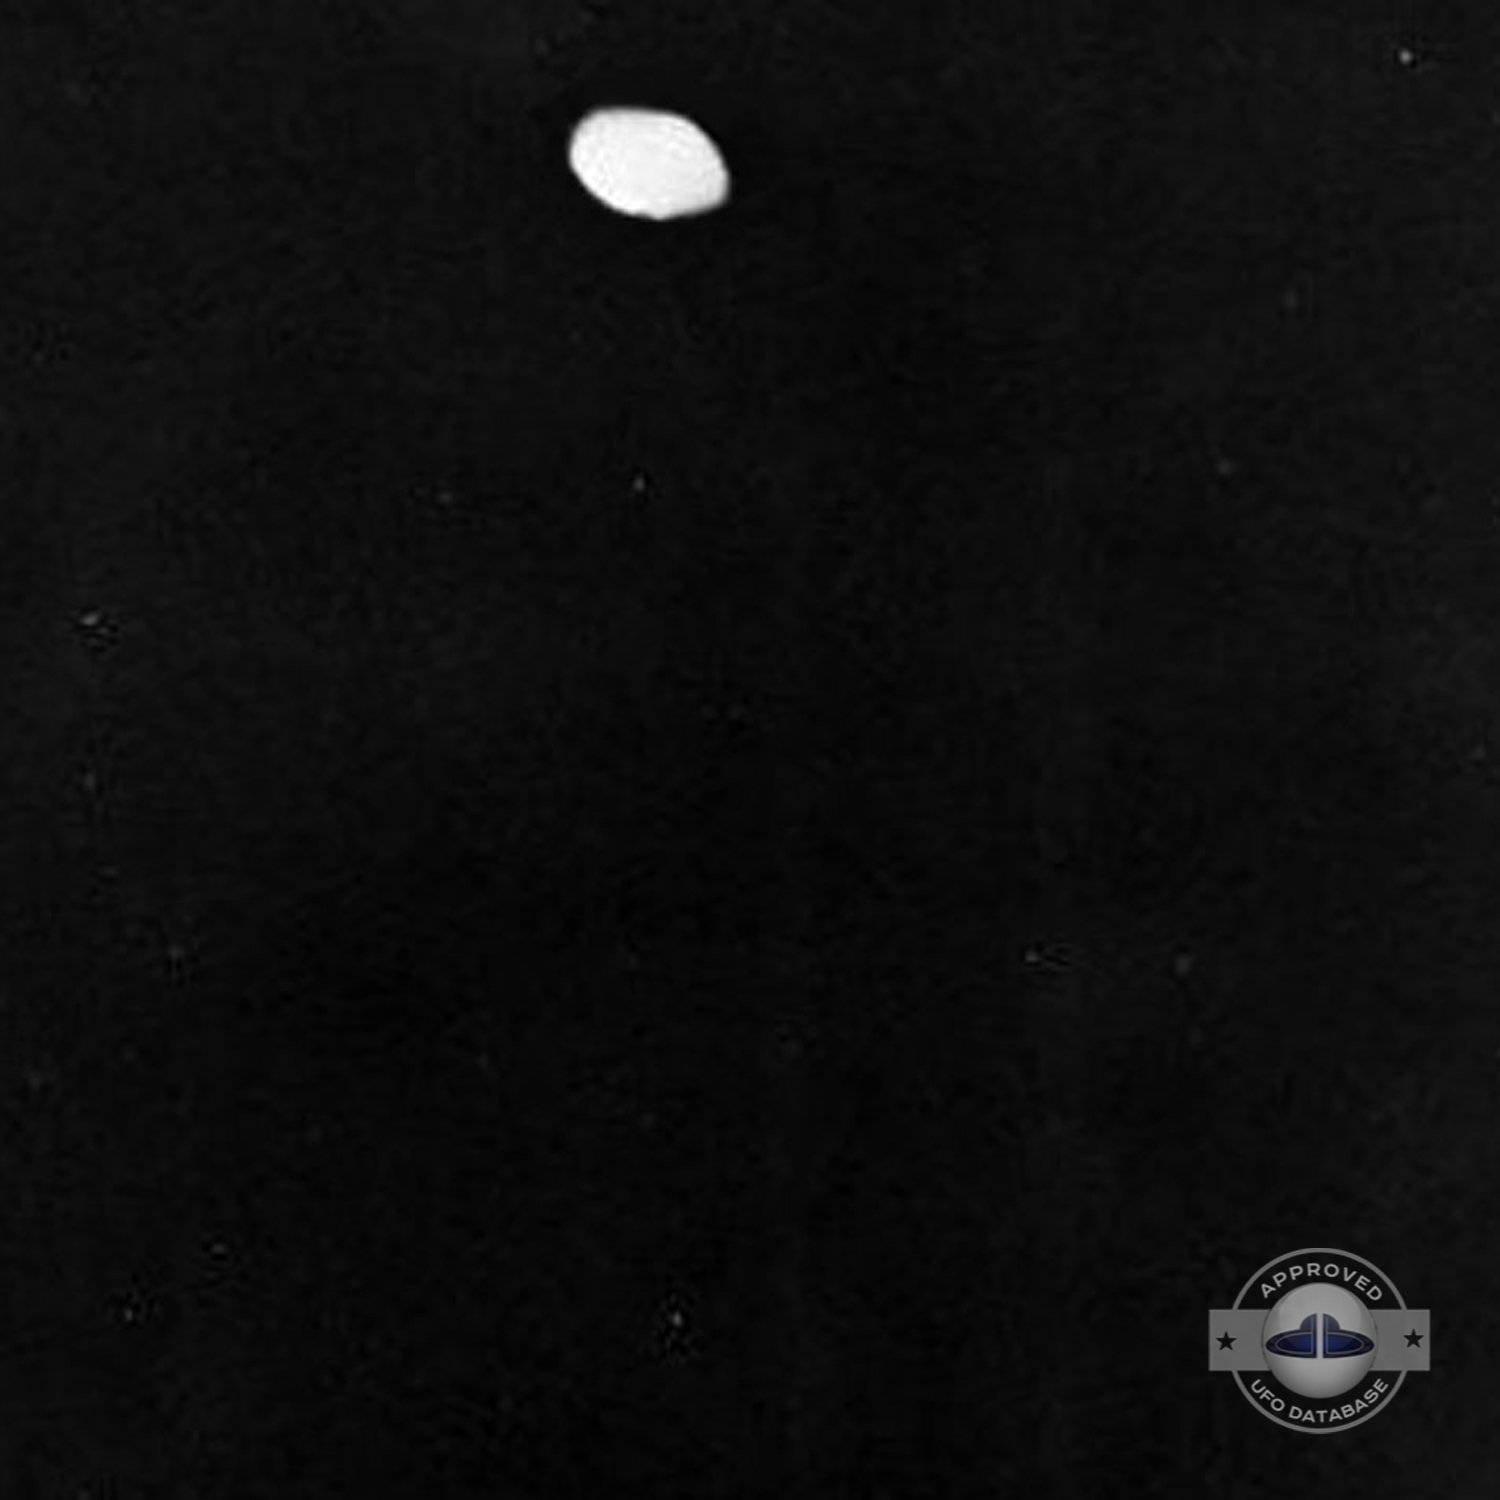 3 Army Air Force veterans seeing 6 UFO Santa Catalina Island, Avalon UFO Picture #111-2